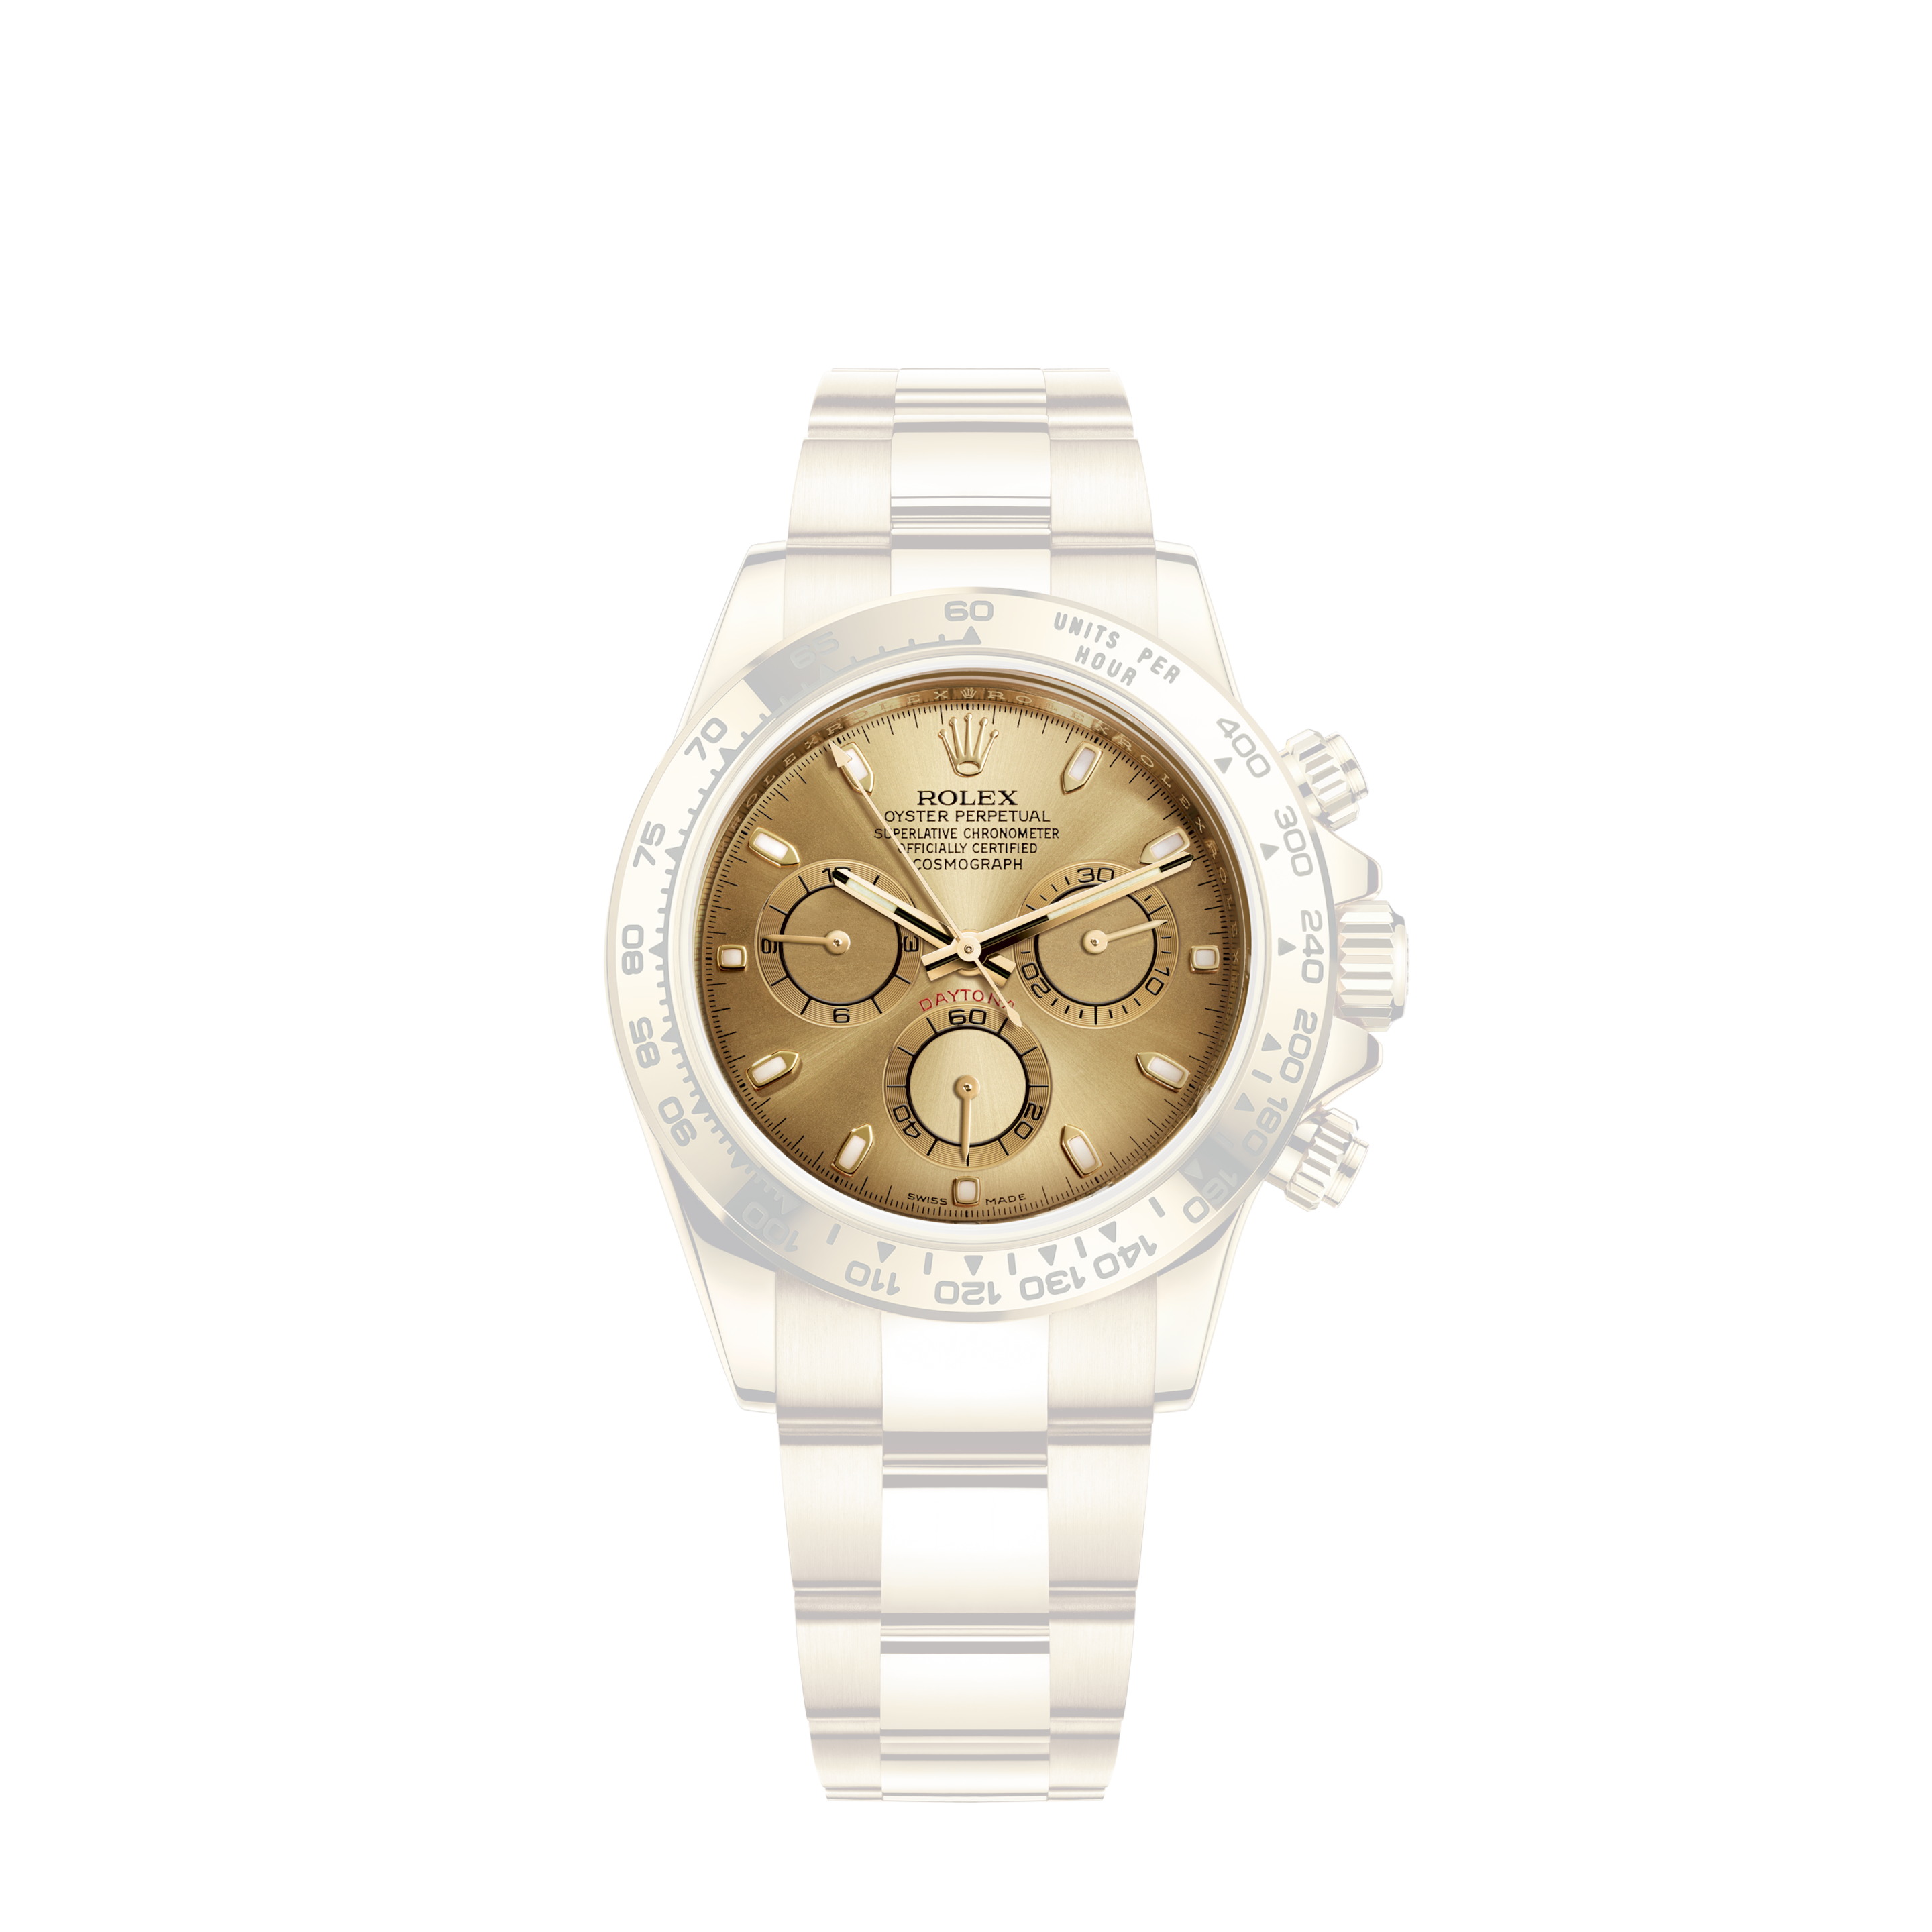 Rolex Datejust Turn O Graph 36mm 16263 Stahl Gelbgold 750 Automatik Stainless Steel 18kt Yellow Gold Damen Oyster-band Chronometer